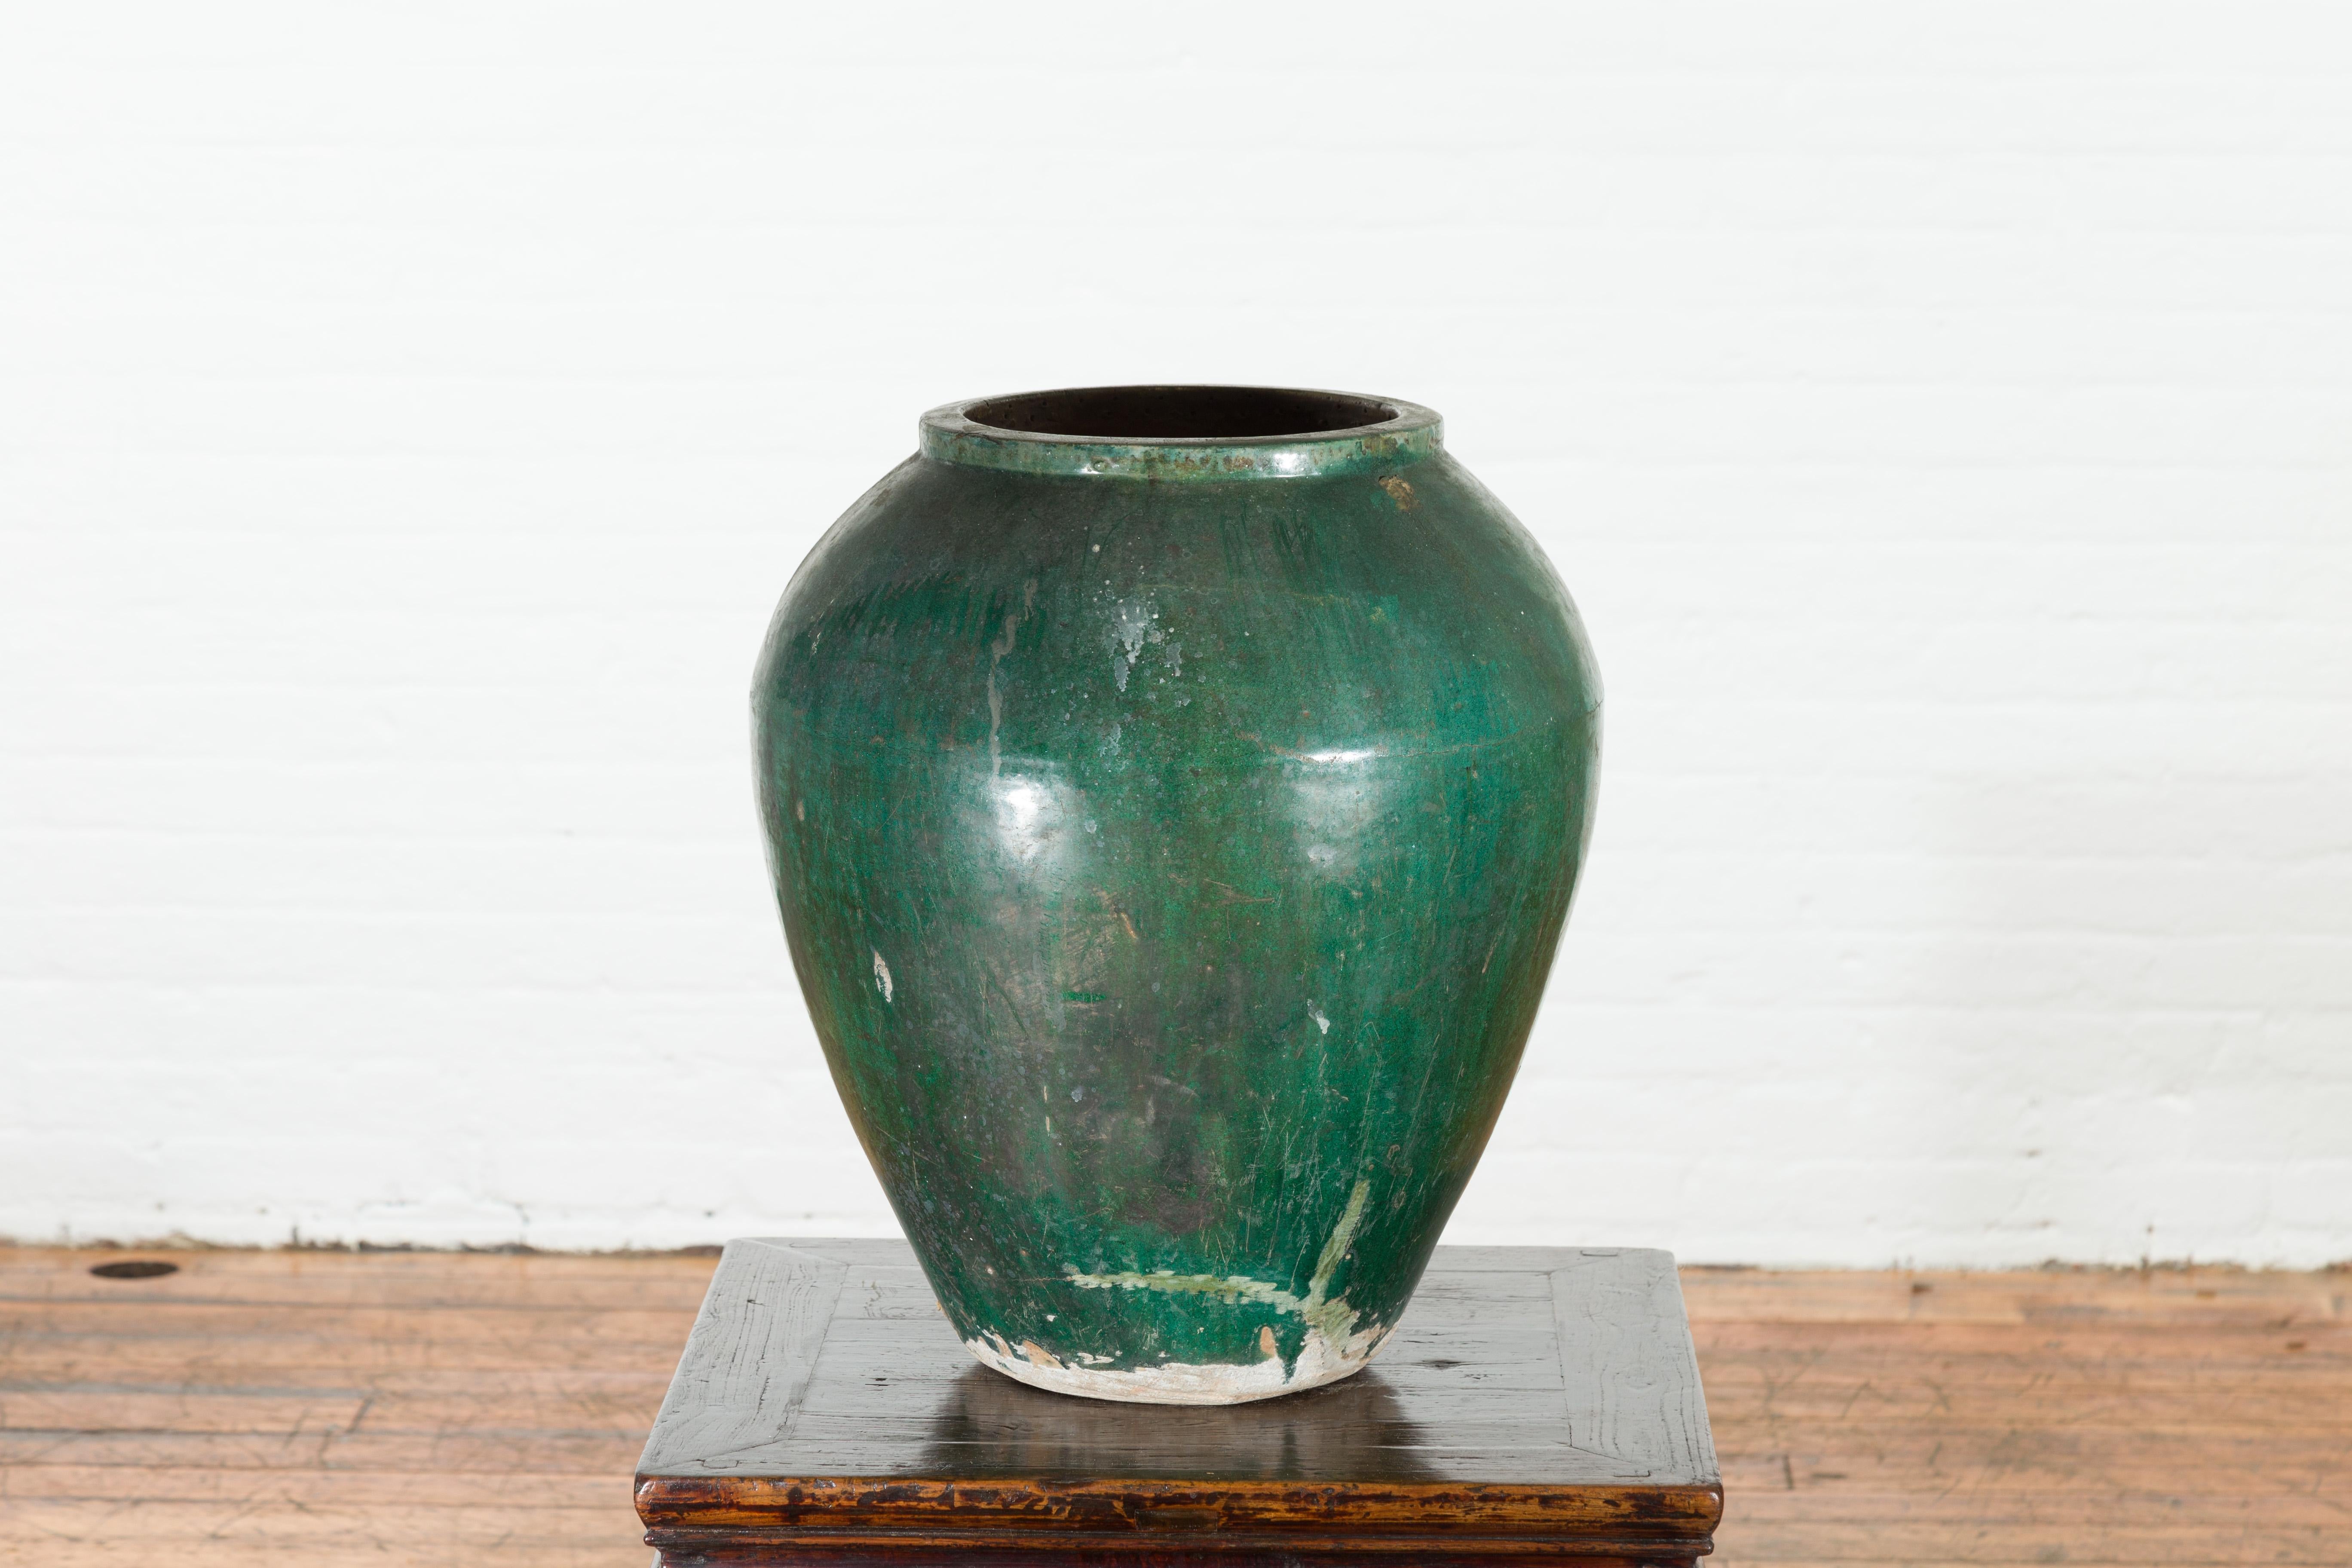 Chinese Vintage Water Jar with Verde Patina and Weathered Appearance 1